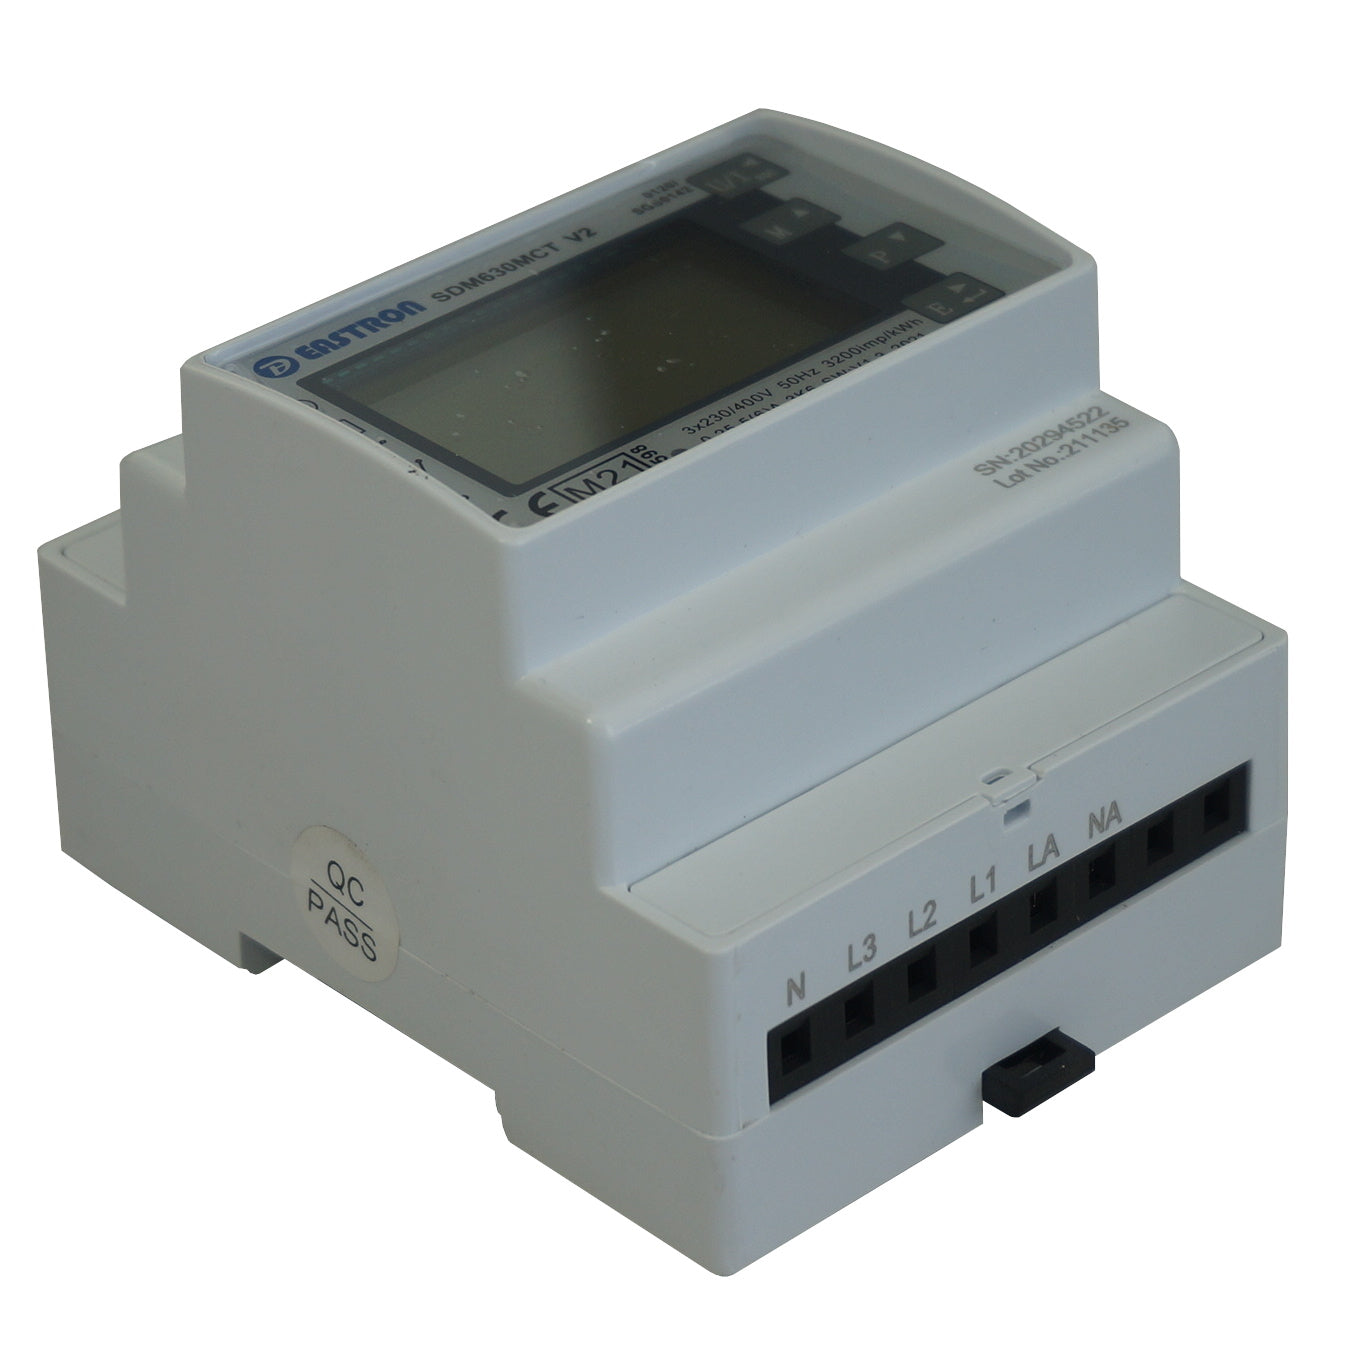 SDM630MCT-LORAWAN-MID-AU915, DIN Rail Mount kWh Meter, 3 Phase, 240VAC aux, Class 1, 1/5 Amp CT Connect, w/ 2 x pulse outputs and LoRaWaN AU915 Wireless Comms